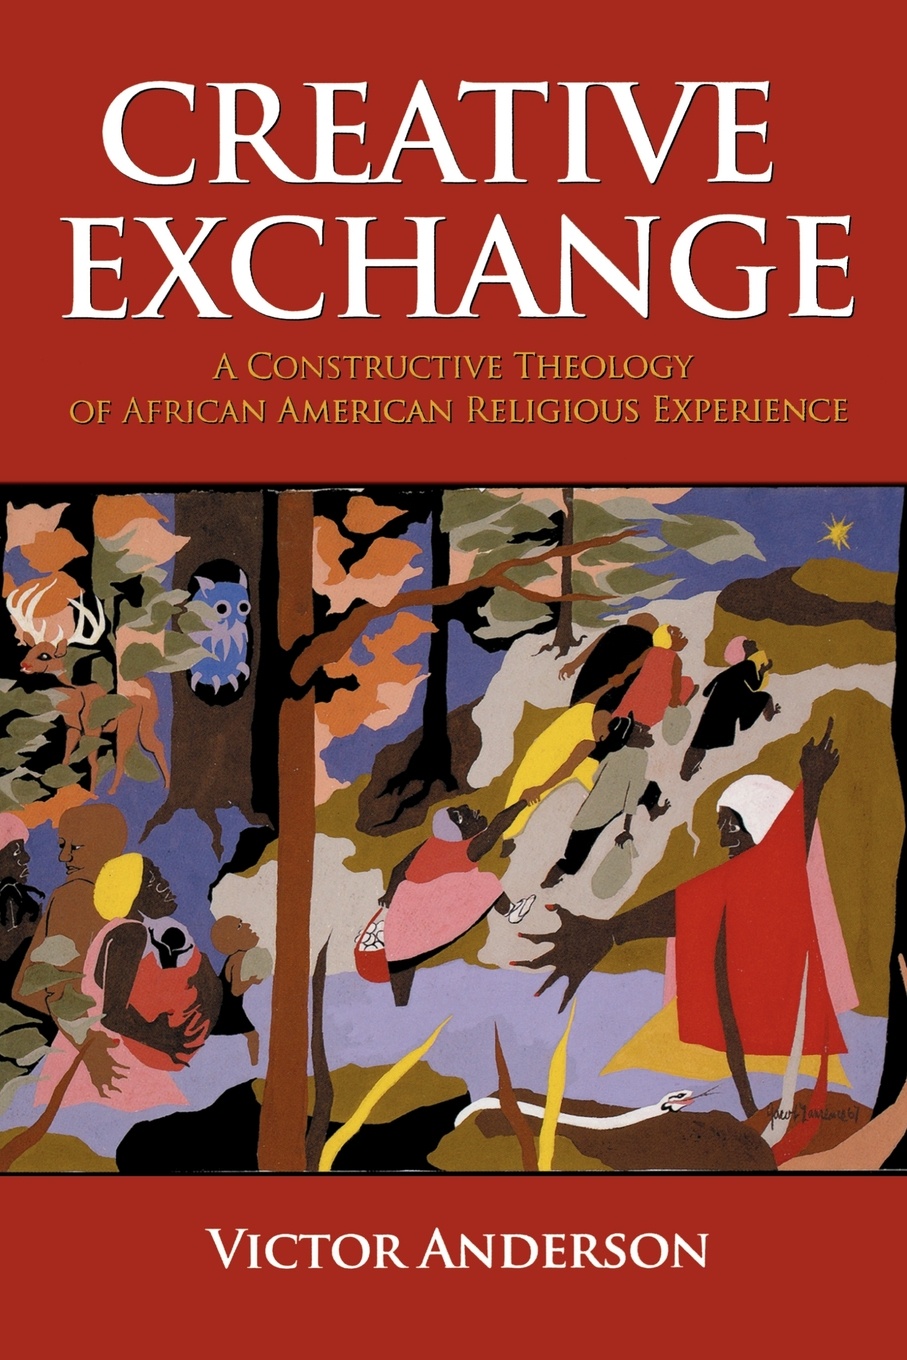 Creative Exchange. A Constructive Theology of African American Religious Experience